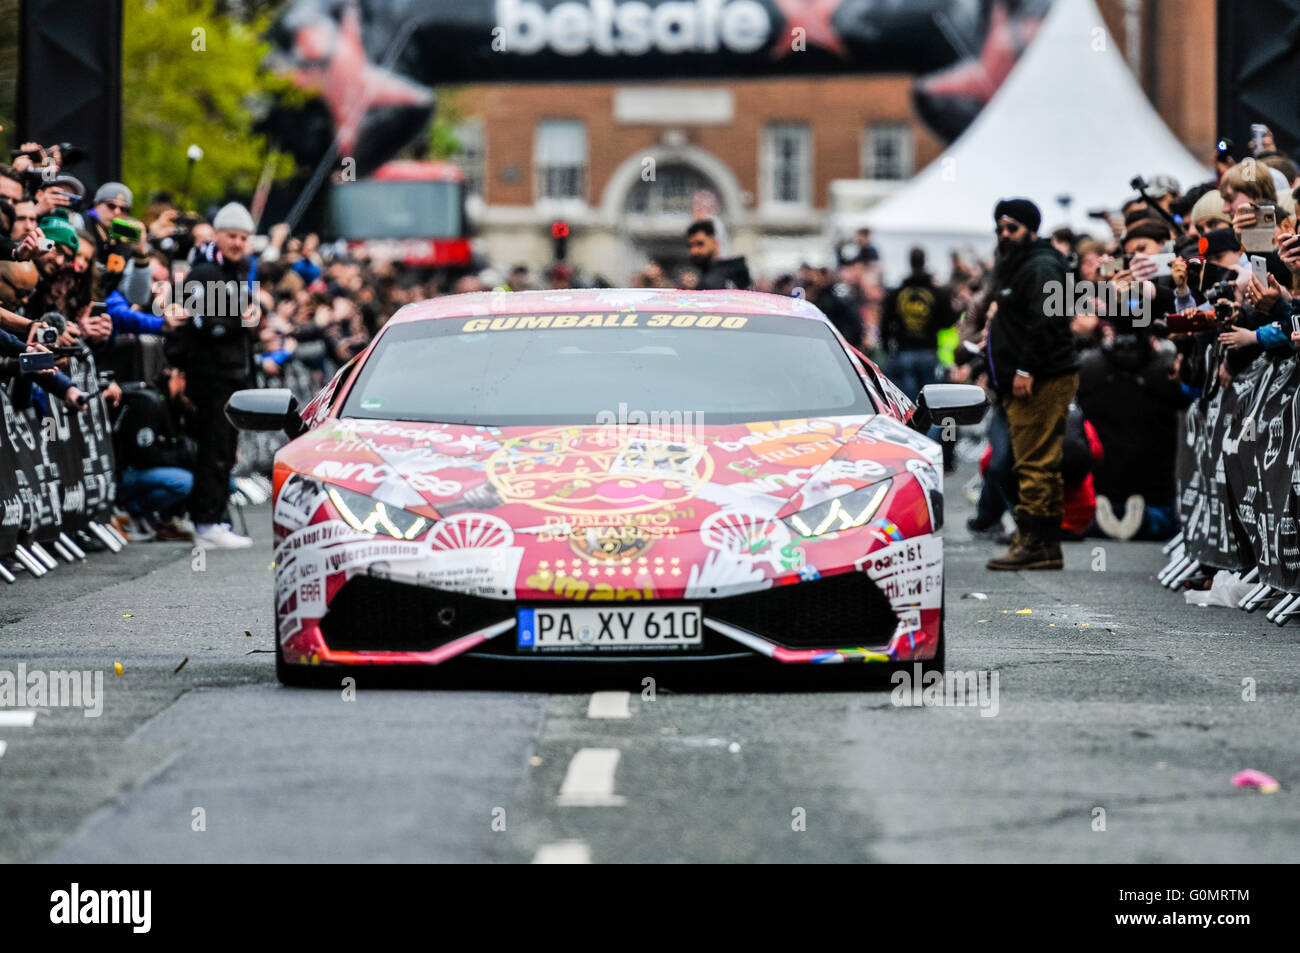 DUBLIN, IRELAND. MAY 01 2016 - A Lamborghini Aventador starts off on a 6 day drive to Bucharest from Dublin as part of the Gumball 3000 rally. Stock Photo